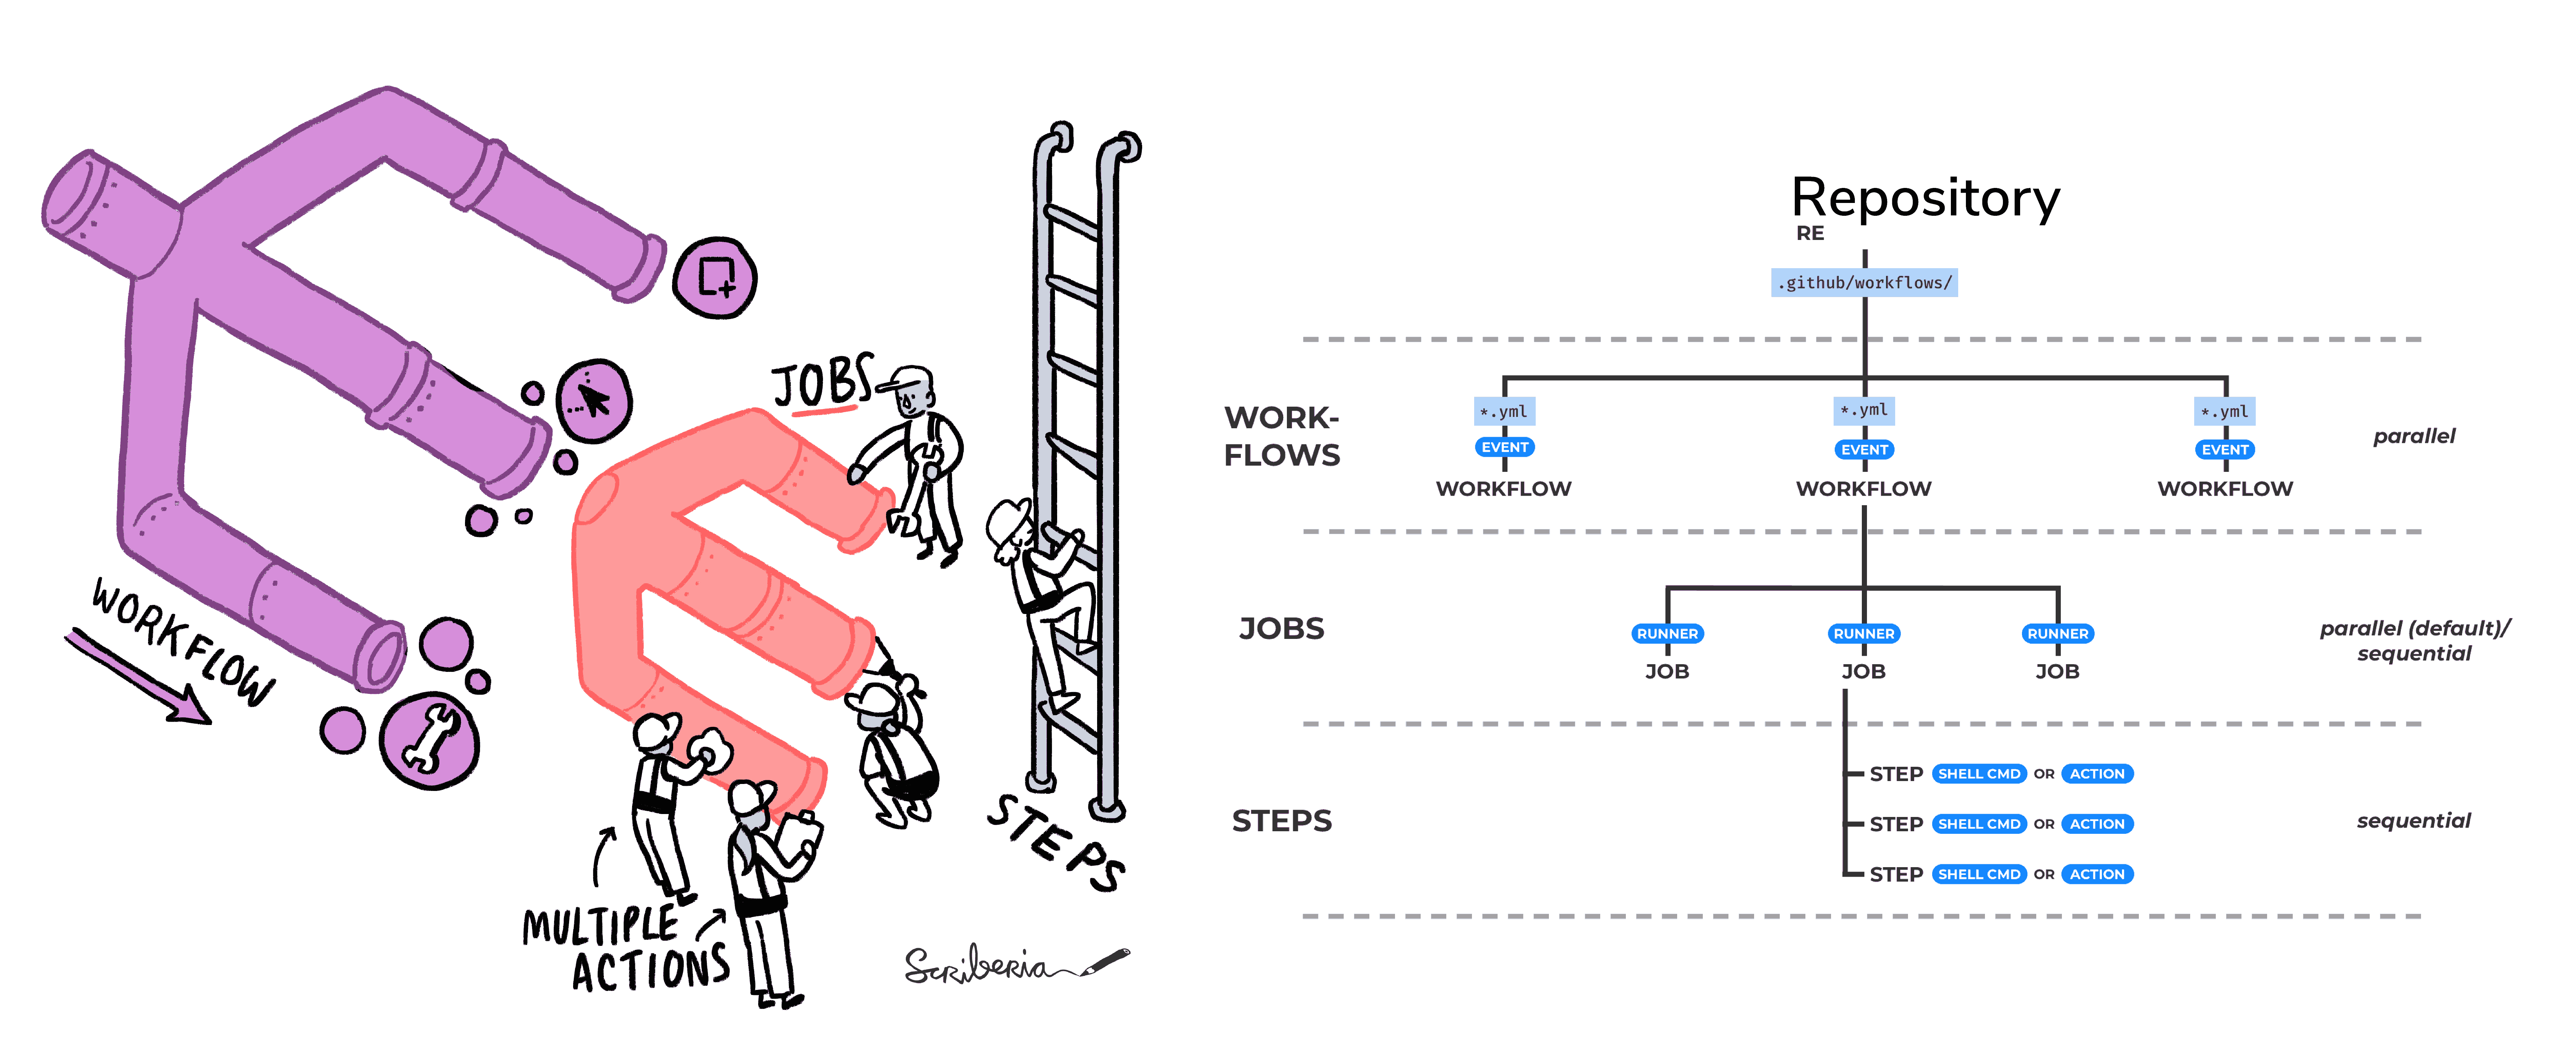 An illustration of how continuous integration works with multiple jobs and actions working alongside each other to feed into an illustration of steps to show merging into the main version.